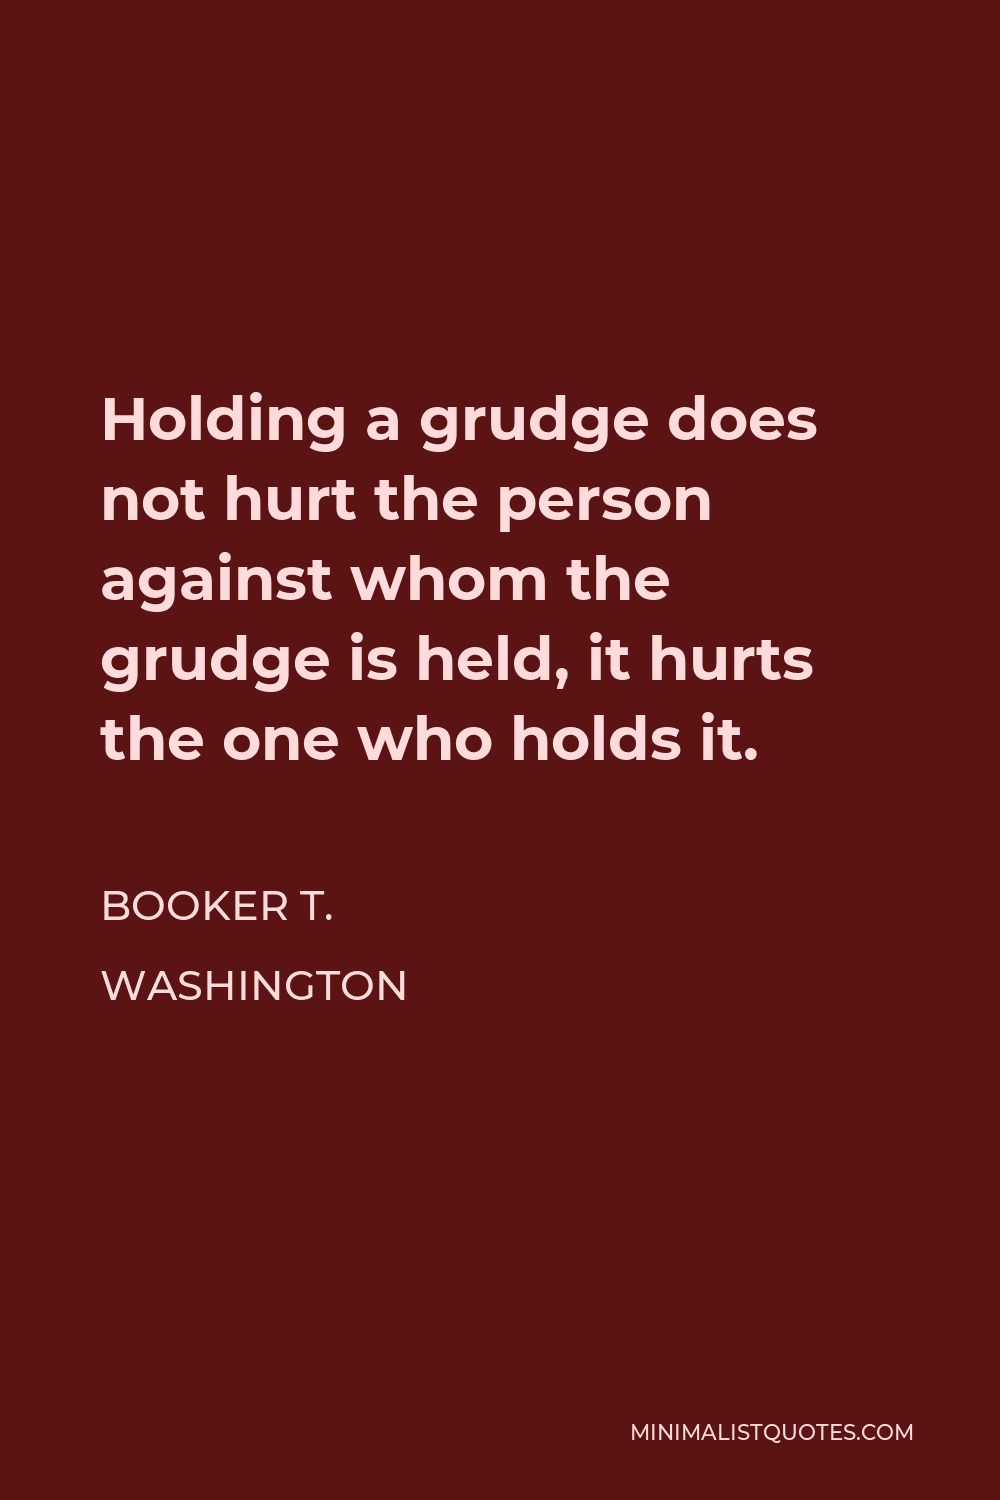 Booker T. Washington Quote - Holding a grudge does not hurt the person against whom the grudge is held, it hurts the one who holds it.